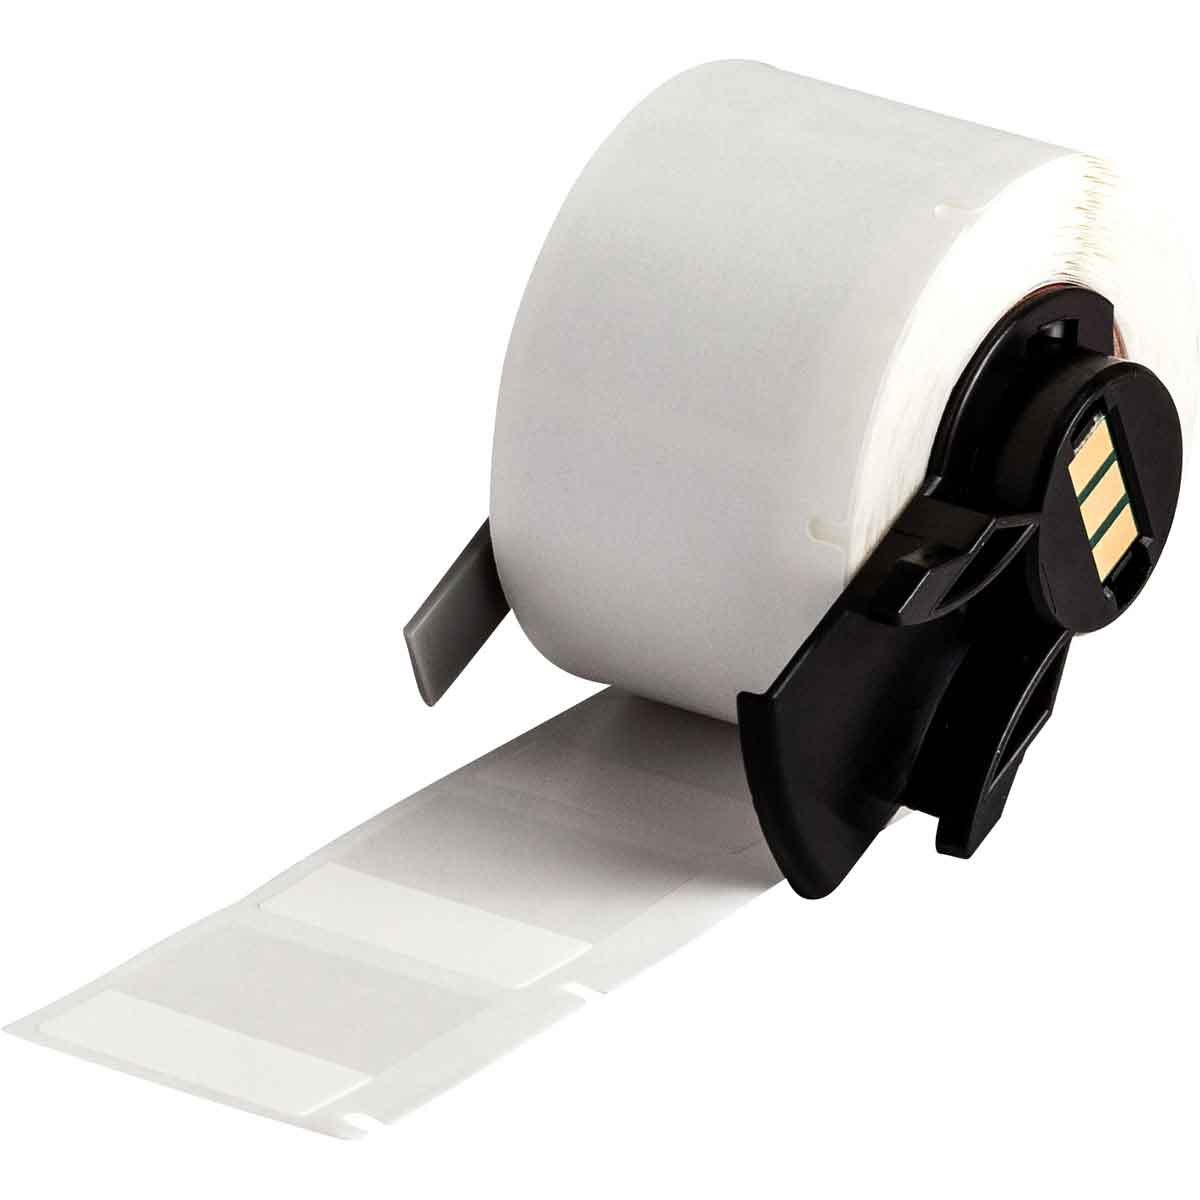 Self-Laminating Vinyl Wrap Around Wire and Cable Labels for M6 M7 Printers 1'' x 1'' 250/Roll